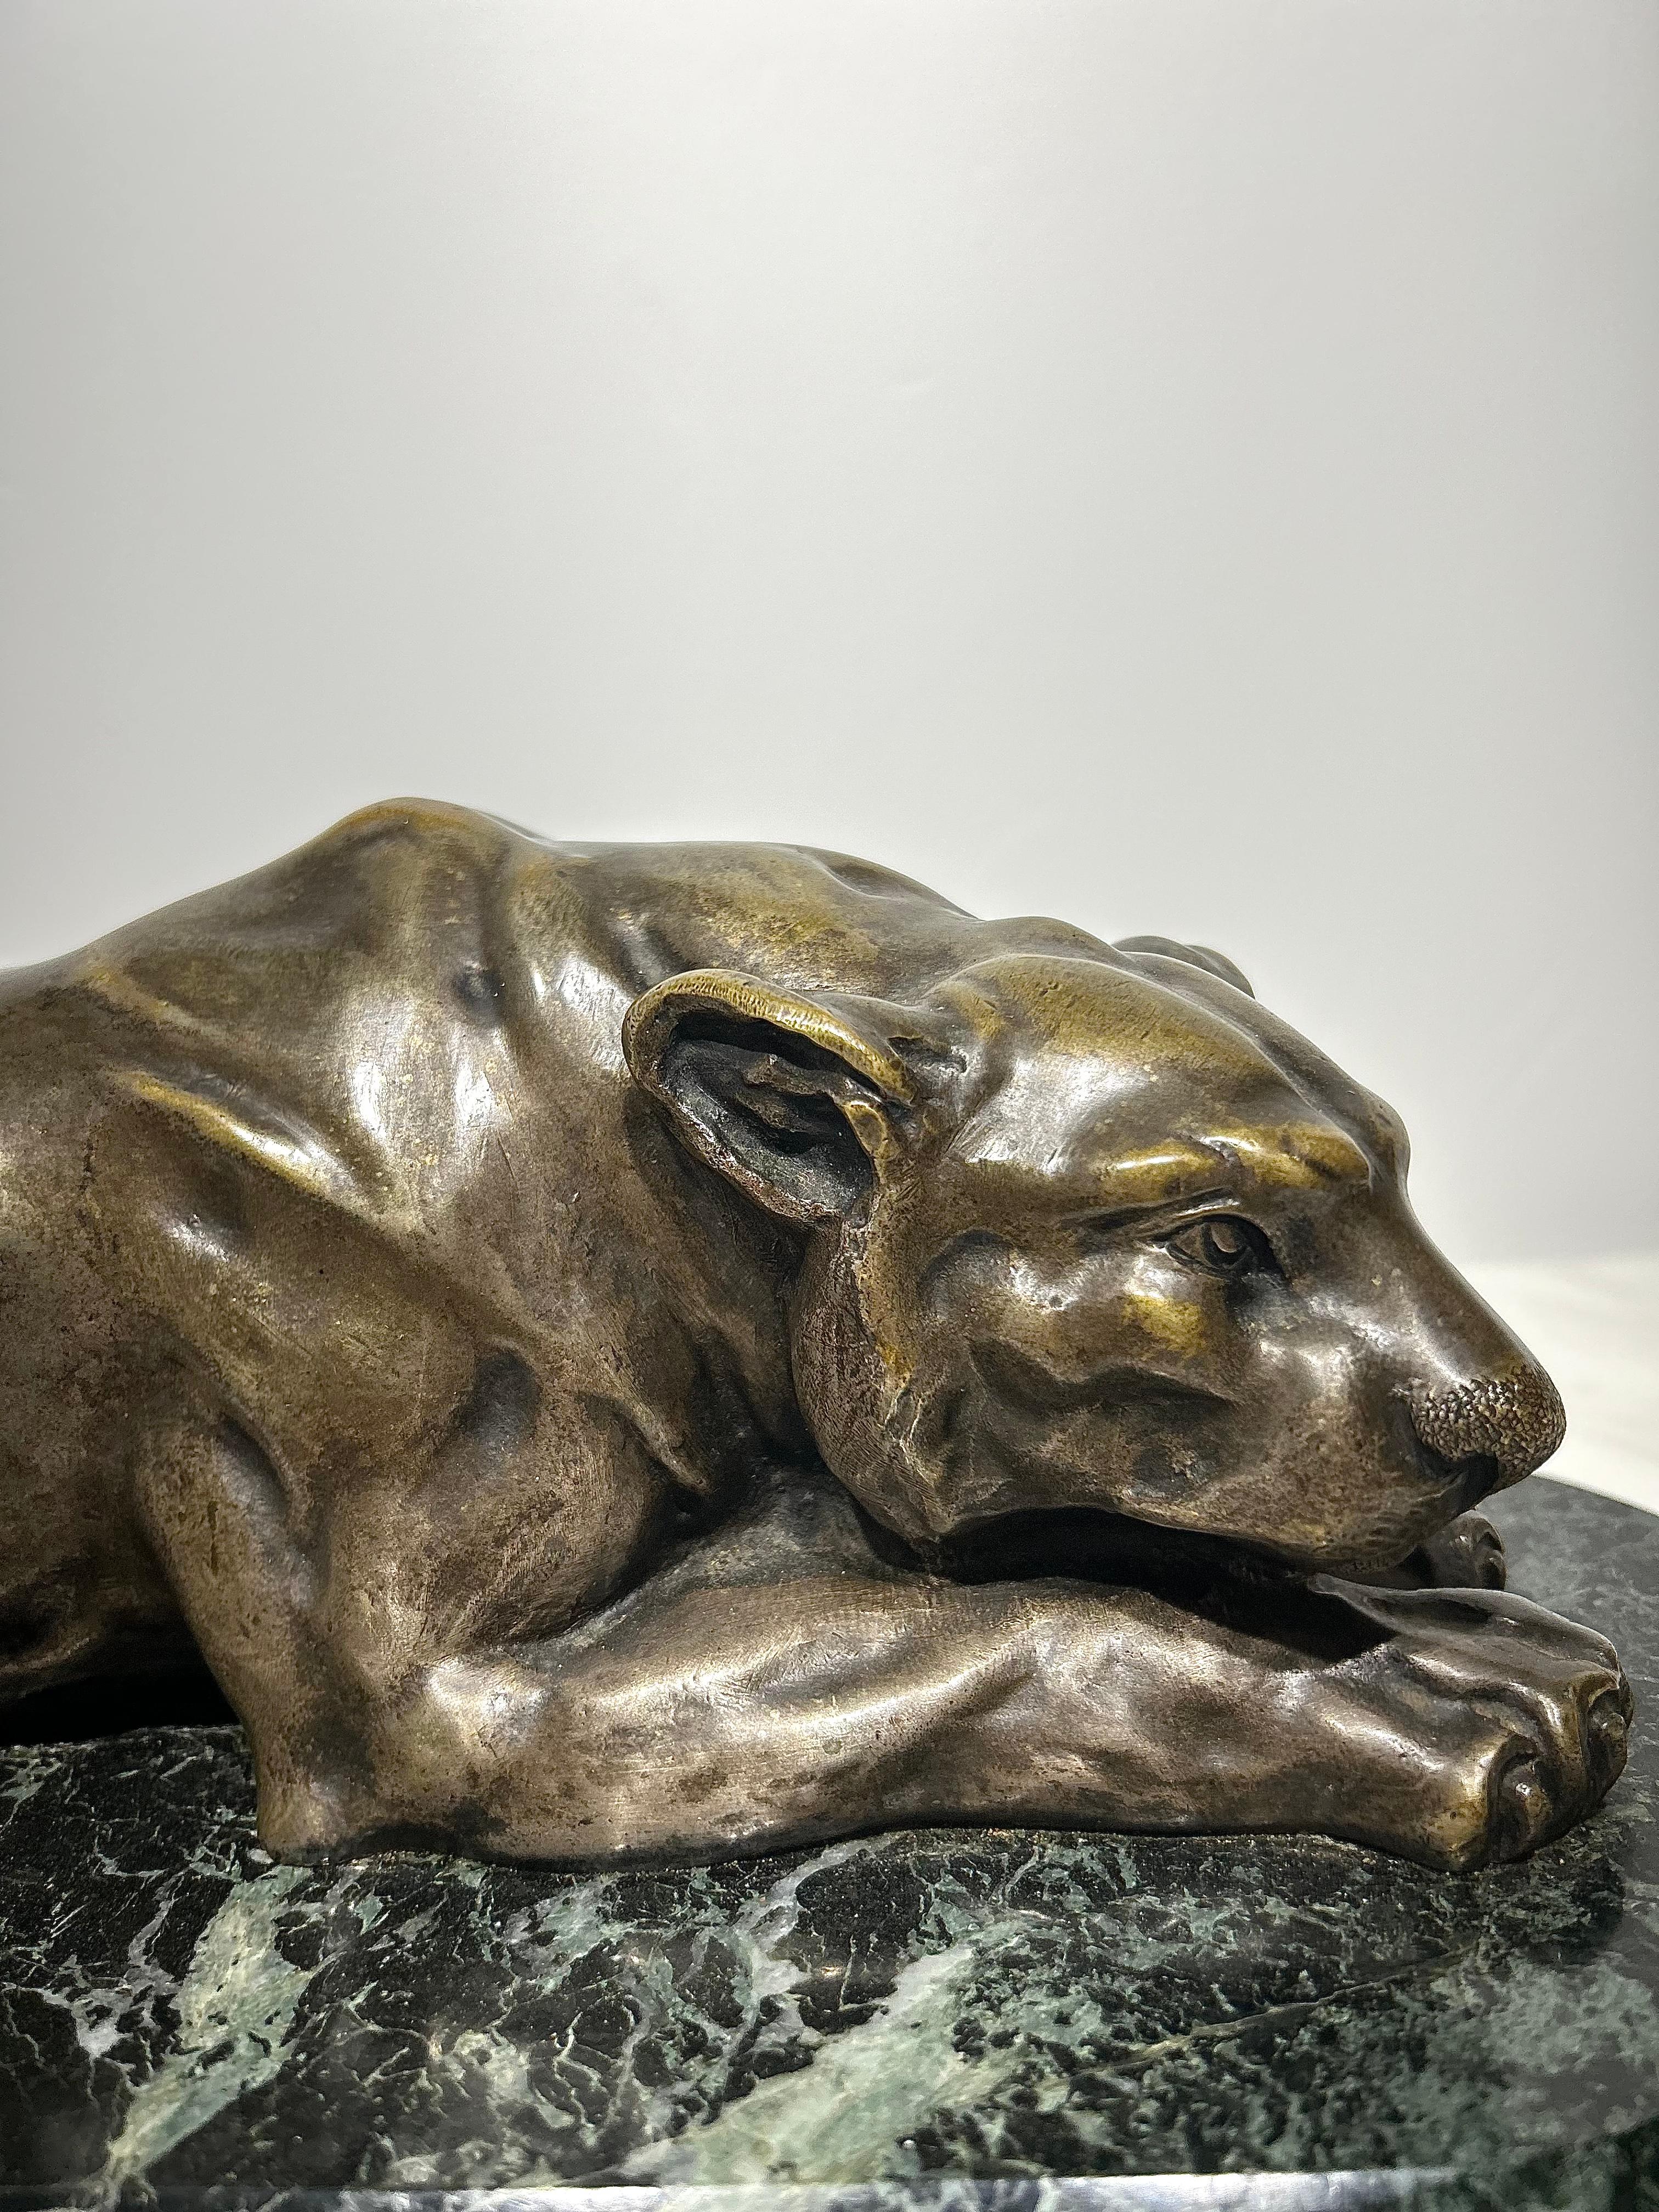 A lioness sculpted in bronze mounted onto a verde antico marble base. Designed and signed by the sculptor in the mid 19th century, this detailed piece has a wonderful patina finish and would look fantastic in anyone’s home.